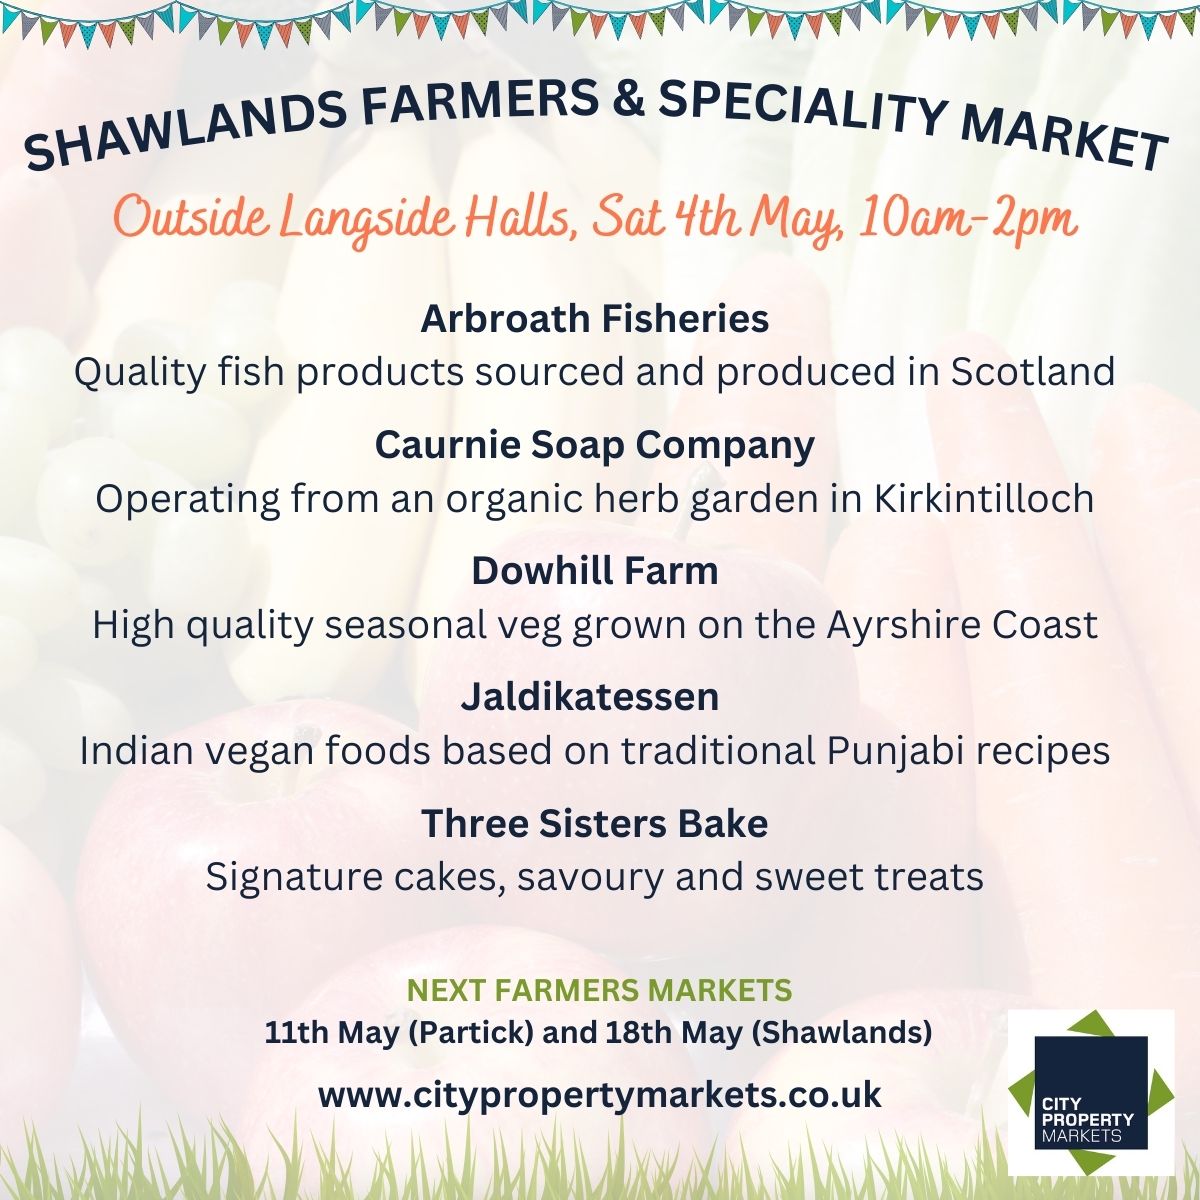 We're back in Shawlands on Saturday - find us outside Langside Halls 10am-2pm 🥩🍰
citypropertymarkets.co.uk
#GlasgowMarkets #ShopLocal #CityPropertyMarkets #GlasgowSouthside #Shawlands #ShopLocal #WhatsOnGlasgow 
Details correct at publication, but may be subject to change.